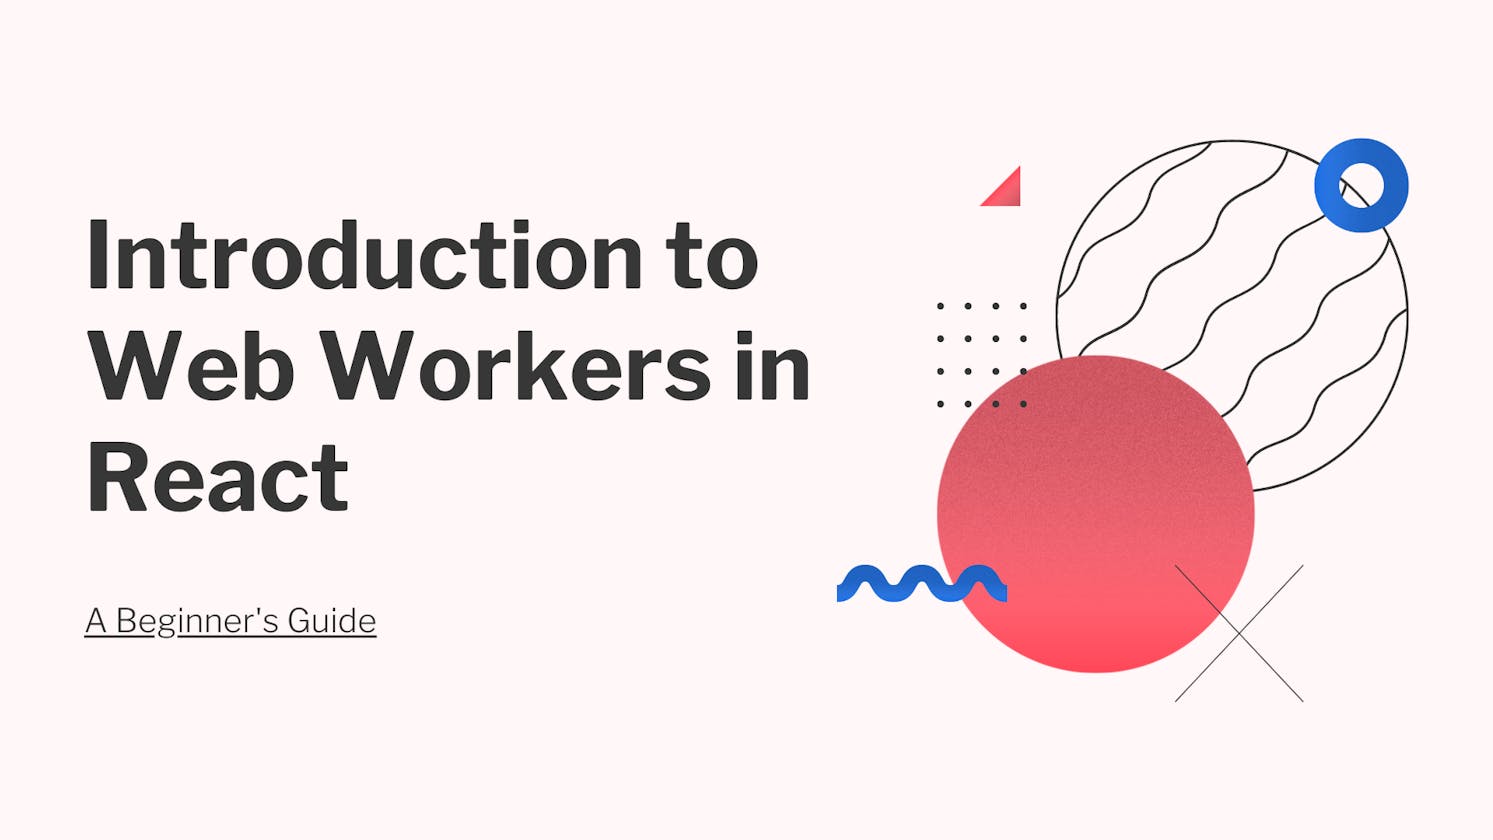 Introduction to Web Workers in React: A Beginner's Guide